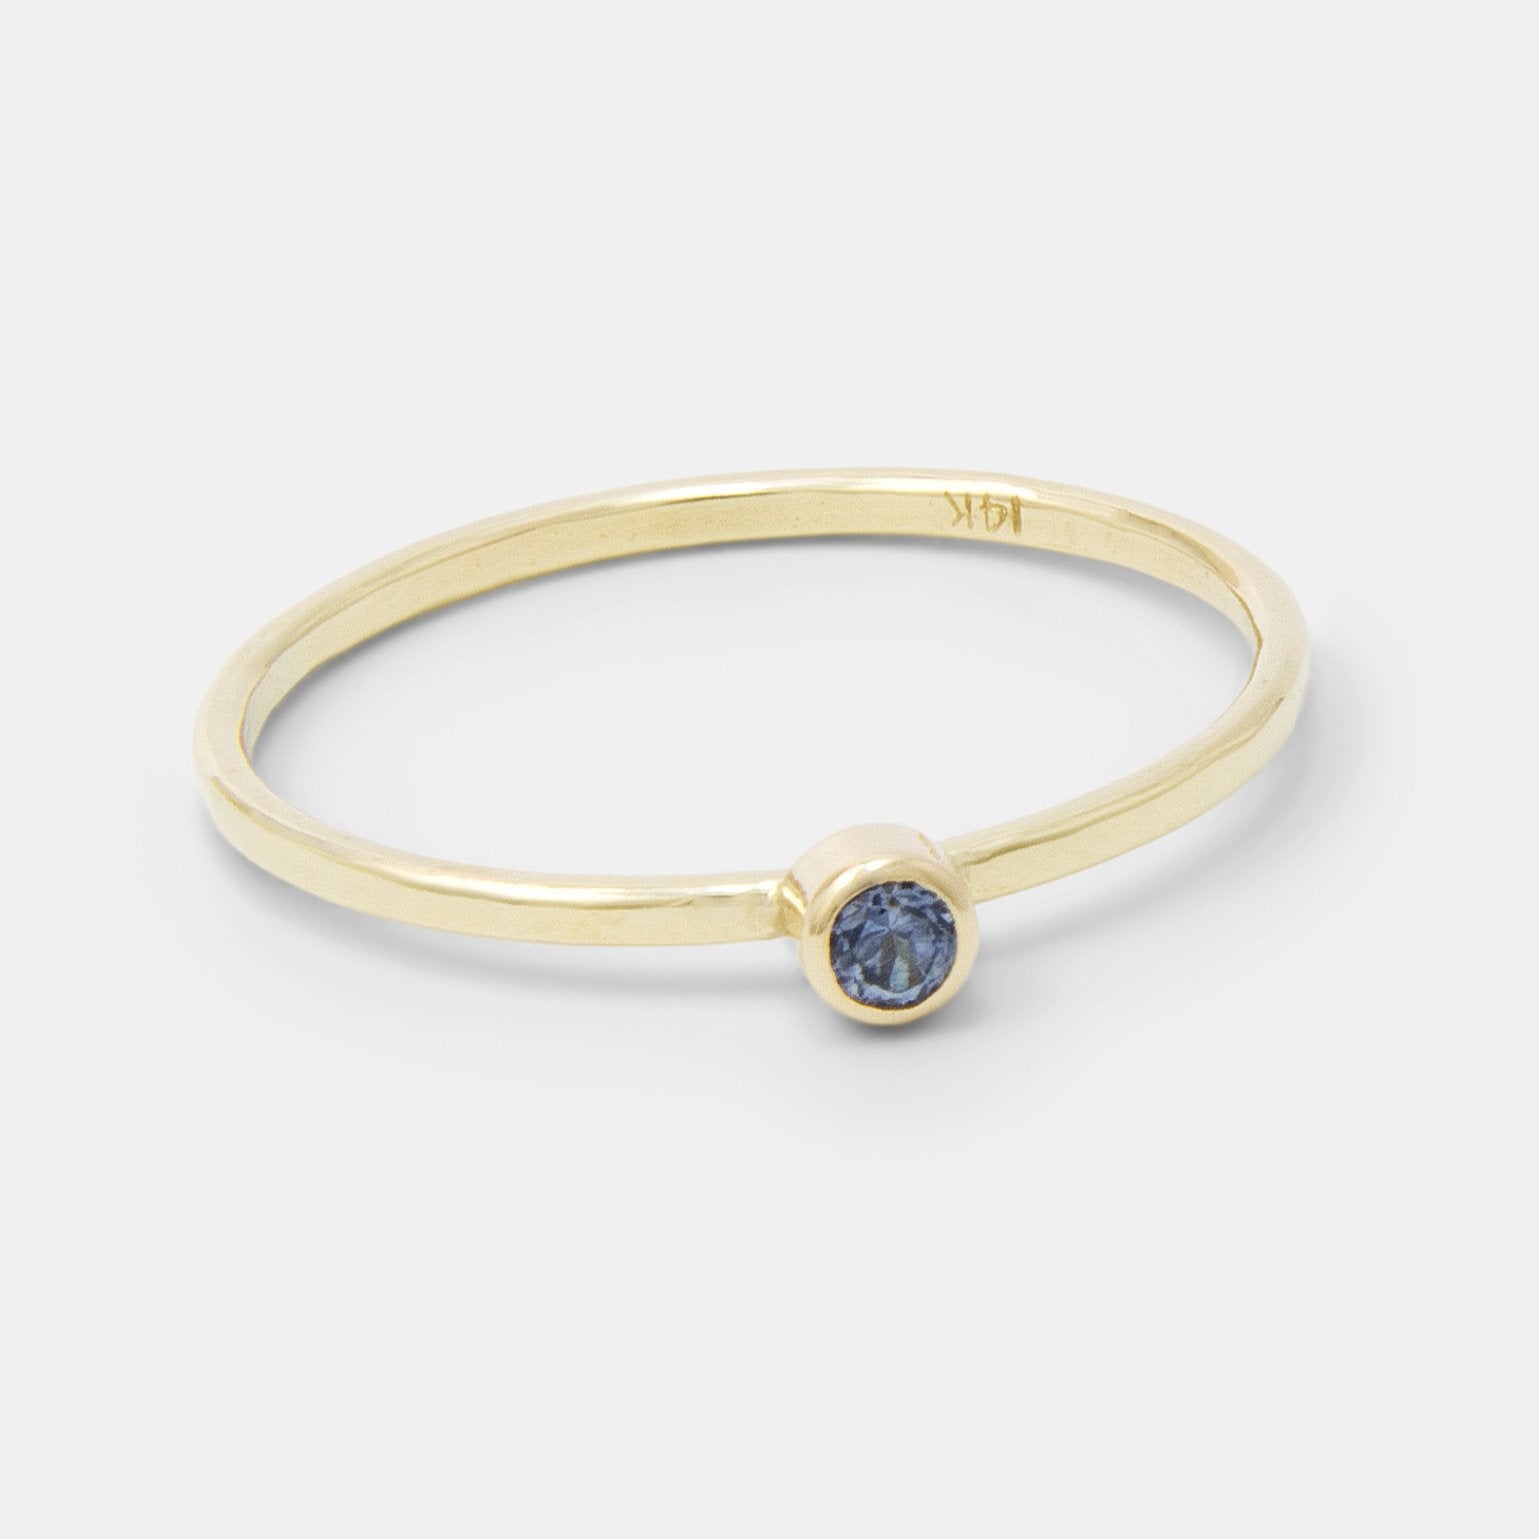 Montana sapphire & solid gold stacking ring - Simone Walsh Jewellery Australia